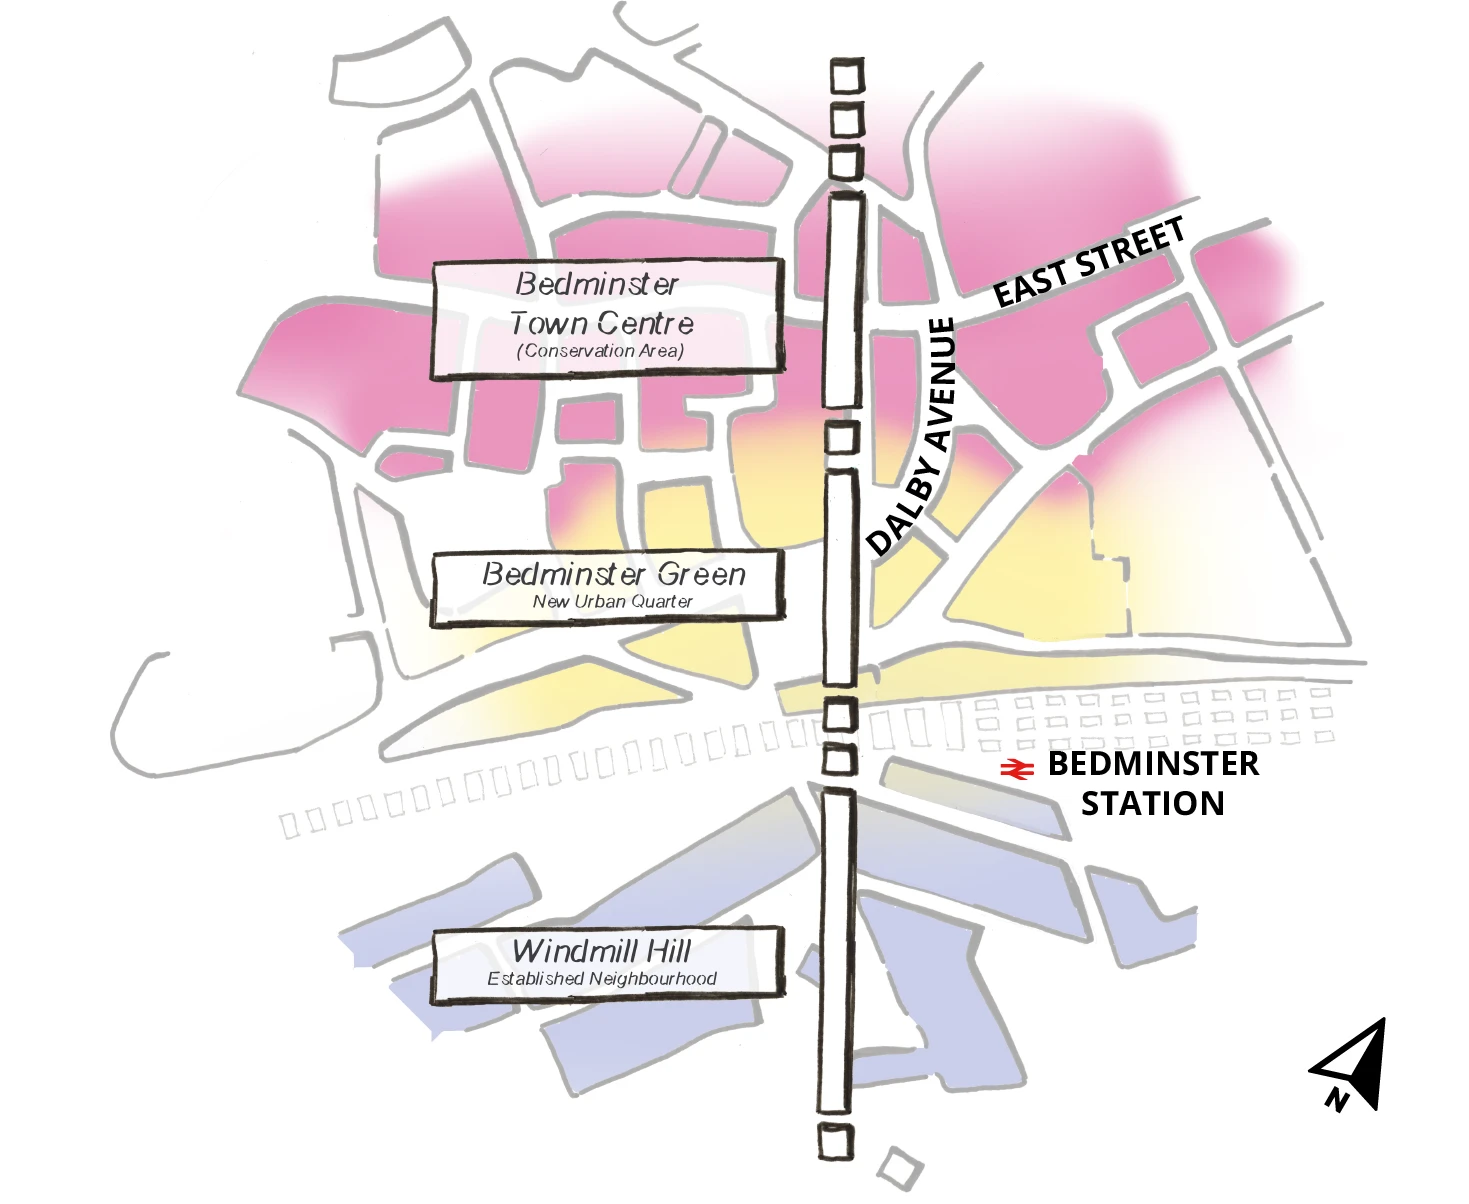 The base of this diagram, which is the same for all the framework diagrams, is a hand drawing showing the urban blocks of the wider Bedminster Green area – East Street is towards the top of the image, Dalby Avenue is in the middle, the railway and Bedminster station is below that and Windmill Hill is at the bottom. The top of the diagram is highlighted in pink and labelled ‘Bedminster Town Centre’. The middle of the diagram is highlighted in yellow and labelled ‘Bedminster Green – New Urban Quarter’. The bottom of the diagram is highlighted blue and is labelled ‘Windmill Hill’.